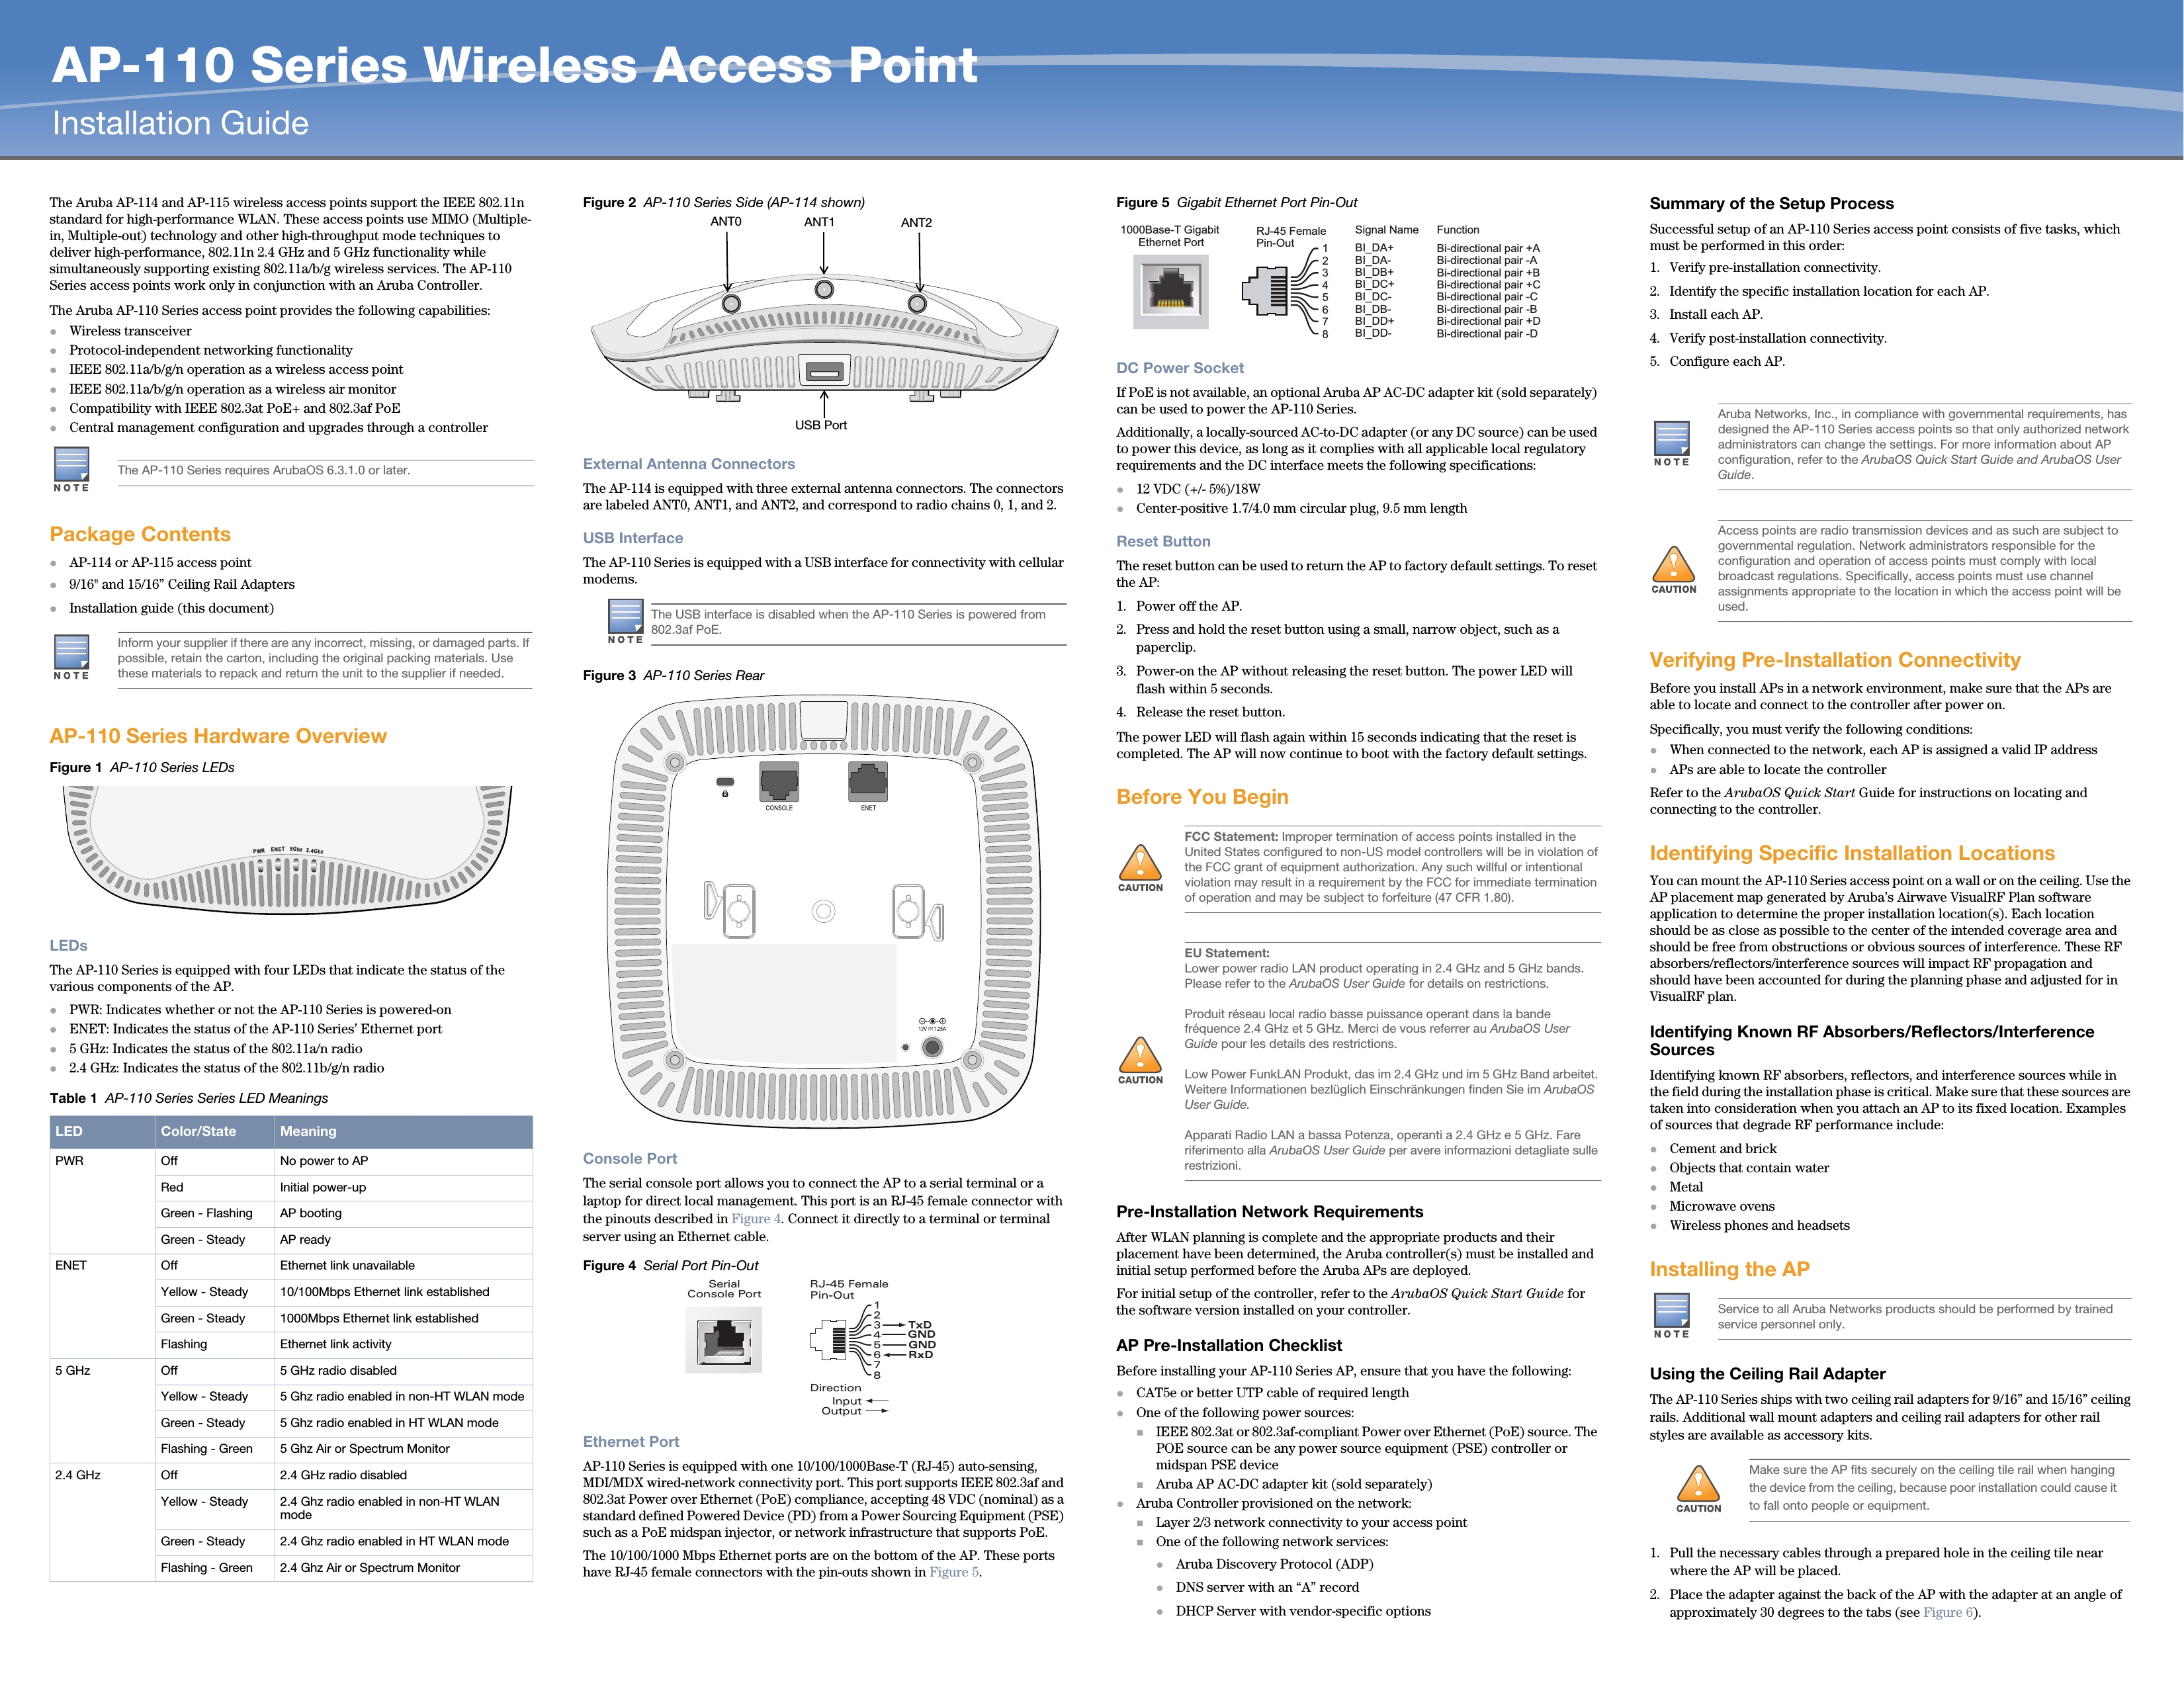 AP-110 Series Wireless Access PointInstallation GuideThe Aruba AP-114 and AP-115 wireless access points support the IEEE 802.11n standard for high-performance WLAN. These access points use MIMO (Multiple-in, Multiple-out) technology and other high-throughput mode techniques to deliver high-performance, 802.11n 2.4 GHz and 5 GHz functionality while simultaneously supporting existing 802.11a/b/g wireless services. The AP-110 Series access points work only in conjunction with an Aruba Controller.The Aruba AP-110 Series access point provides the following capabilities:Wireless transceiverProtocol-independent networking functionalityIEEE 802.11a/b/g/n operation as a wireless access pointIEEE 802.11a/b/g/n operation as a wireless air monitorCompatibility with IEEE 802.3at PoE+ and 802.3af PoE Central management configuration and upgrades through a controllerPackage ContentsAP-114 or AP-115 access point 9/16&quot; and 15/16” Ceiling Rail AdaptersInstallation guide (this document)AP-110 Series Hardware OverviewFigure 1  AP-110 Series LEDsLEDsThe AP-110 Series is equipped with four LEDs that indicate the status of the various components of the AP.PWR: Indicates whether or not the AP-110 Series is powered-onENET: Indicates the status of the AP-110 Series’ Ethernet port5 GHz: Indicates the status of the 802.11a/n radio2.4 GHz: Indicates the status of the 802.11b/g/n radioFigure 2  AP-110 Series Side (AP-114 shown) External Antenna ConnectorsThe AP-114 is equipped with three external antenna connectors. The connectors are labeled ANT0, ANT1, and ANT2, and correspond to radio chains 0, 1, and 2. USB InterfaceThe AP-110 Series is equipped with a USB interface for connectivity with cellular modems. Figure 3  AP-110 Series RearConsole PortThe serial console port allows you to connect the AP to a serial terminal or a laptop for direct local management. This port is an RJ-45 female connector with the pinouts described in Figure 4. Connect it directly to a terminal or terminal server using an Ethernet cable.Figure 4  Serial Port Pin-OutEthernet PortAP-110 Series is equipped with one 10/100/1000Base-T (RJ-45) auto-sensing, MDI/MDX wired-network connectivity port. This port supports IEEE 802.3af and 802.3at Power over Ethernet (PoE) compliance, accepting 48 VDC (nominal) as a standard defined Powered Device (PD) from a Power Sourcing Equipment (PSE) such as a PoE midspan injector, or network infrastructure that supports PoE.The 10/100/1000 Mbps Ethernet ports are on the bottom of the AP. These ports have RJ-45 female connectors with the pin-outs shown in Figure 5.Figure 5  Gigabit Ethernet Port Pin-OutDC Power SocketIf PoE is not available, an optional Aruba AP AC-DC adapter kit (sold separately) can be used to power the AP-110 Series. Additionally, a locally-sourced AC-to-DC adapter (or any DC source) can be used to power this device, as long as it complies with all applicable local regulatory requirements and the DC interface meets the following specifications:12 VDC (+/- 5%)/18WCenter-positive 1.7/4.0 mm circular plug, 9.5 mm lengthReset ButtonThe reset button can be used to return the AP to factory default settings. To reset the AP:1. Power off the AP.2. Press and hold the reset button using a small, narrow object, such as a paperclip.3. Power-on the AP without releasing the reset button. The power LED will flash within 5 seconds.4. Release the reset button.The power LED will flash again within 15 seconds indicating that the reset is completed. The AP will now continue to boot with the factory default settings.Before You BeginPre-Installation Network RequirementsAfter WLAN planning is complete and the appropriate products and their placement have been determined, the Aruba controller(s) must be installed and initial setup performed before the Aruba APs are deployed.For initial setup of the controller, refer to the ArubaOS Quick Start Guide for the software version installed on your controller.AP Pre-Installation ChecklistBefore installing your AP-110 Series AP, ensure that you have the following:CAT5e or better UTP cable of required lengthOne of the following power sources:IEEE 802.3at or 802.3af-compliant Power over Ethernet (PoE) source. The POE source can be any power source equipment (PSE) controller or midspan PSE deviceAruba AP AC-DC adapter kit (sold separately)Aruba Controller provisioned on the network:Layer 2/3 network connectivity to your access pointOne of the following network services:Aruba Discovery Protocol (ADP)DNS server with an “A” recordDHCP Server with vendor-specific optionsSummary of the Setup ProcessSuccessful setup of an AP-110 Series access point consists of five tasks, which must be performed in this order:1. Verify pre-installation connectivity.2. Identify the specific installation location for each AP.3. Install each AP.4. Verify post-installation connectivity.5. Configure each AP.Verifying Pre-Installation ConnectivityBefore you install APs in a network environment, make sure that the APs are able to locate and connect to the controller after power on.Specifically, you must verify the following conditions:When connected to the network, each AP is assigned a valid IP addressAPs are able to locate the controller Refer to the ArubaOS Quick Start Guide for instructions on locating and connecting to the controller.Identifying Specific Installation LocationsYou can mount the AP-110 Series access point on a wall or on the ceiling. Use the AP placement map generated by Aruba’s Airwave VisualRF Plan software application to determine the proper installation location(s). Each location should be as close as possible to the center of the intended coverage area and should be free from obstructions or obvious sources of interference. These RF absorbers/reflectors/interference sources will impact RF propagation and should have been accounted for during the planning phase and adjusted for in VisualRF plan.Identifying Known RF Absorbers/Reflectors/Interference SourcesIdentifying known RF absorbers, reflectors, and interference sources while in the field during the installation phase is critical. Make sure that these sources are taken into consideration when you attach an AP to its fixed location. Examples of sources that degrade RF performance include:Cement and brickObjects that contain waterMetalMicrowave ovensWireless phones and headsetsInstalling the APUsing the Ceiling Rail AdapterThe AP-110 Series ships with two ceiling rail adapters for 9/16” and 15/16” ceiling rails. Additional wall mount adapters and ceiling rail adapters for other rail styles are available as accessory kits.1. Pull the necessary cables through a prepared hole in the ceiling tile near where the AP will be placed.2. Place the adapter against the back of the AP with the adapter at an angle of approximately 30 degrees to the tabs (see Figure 6).The AP-110 Series requires ArubaOS 6.3.1.0 or later.Inform your supplier if there are any incorrect, missing, or damaged parts. If possible, retain the carton, including the original packing materials. Use these materials to repack and return the unit to the supplier if needed.Table 1  AP-110 Series Series LED MeaningsLED Color/State MeaningPWR Off No power to APRed Initial power-up Green - Flashing AP bootingGreen - Steady AP readyENET Off Ethernet link unavailableYellow - Steady 10/100Mbps Ethernet link establishedGreen - Steady 1000Mbps Ethernet link establishedFlashing Ethernet link activity5 GHz Off 5 GHz radio disabledYellow - Steady 5 Ghz radio enabled in non-HT WLAN modeGreen - Steady 5 Ghz radio enabled in HT WLAN modeFlashing - Green  5 Ghz Air or Spectrum Monitor2.4 GHz Off 2.4 GHz radio disabledYellow - Steady 2.4 Ghz radio enabled in non-HT WLAN modeGreen - Steady 2.4 Ghz radio enabled in HT WLAN modeFlashing - Green  2.4 Ghz Air or Spectrum Monitor2.4Ghz5GhzENETPWRThe USB interface is disabled when the AP-110 Series is powered from 802.3af PoE.ANT0 ANT2ANT1USB PortSerialConsole Port12345678TxDGNDRxDRJ-45 FemalePin-OutDirectionInputOutputGND!FCC Statement: Improper termination of access points installed in the United States configured to non-US model controllers will be in violation of the FCC grant of equipment authorization. Any such willful or intentional violation may result in a requirement by the FCC for immediate termination of operation and may be subject to forfeiture (47 CFR 1.80).!EU Statement: Lower power radio LAN product operating in 2.4 GHz and 5 GHz bands. Please refer to the ArubaOS User Guide for details on restrictions.Produit réseau local radio basse puissance operant dans la bande fréquence 2.4 GHz et 5 GHz. Merci de vous referrer au ArubaOS User Guide pour les details des restrictions.Low Power FunkLAN Produkt, das im 2.4 GHz und im 5 GHz Band arbeitet. Weitere Informationen bezlüglich Einschränkungen finden Sie im ArubaOS User Guide.Apparati Radio LAN a bassa Potenza, operanti a 2.4 GHz e 5 GHz. Fare riferimento alla ArubaOS User Guide per avere informazioni detagliate sulle restrizioni.1000Base-T Gigabit Ethernet PortRJ-45 FemalePin-OutSignal Name12345678BI_DC+BI_DC-BI_DD+BI_DD-BI_DA+BI_DA-BI_DB+BI_DB-FunctionBi-directional pair +CBi-directional pair -CBi-directional pair +DBi-directional pair -DBi-directional pair +ABi-directional pair -ABi-directional pair +BBi-directional pair -B     Aruba Networks, Inc., in compliance with governmental requirements, has designed the AP-110 Series access points so that only authorized network administrators can change the settings. For more information about AP configuration, refer to the ArubaOS Quick Start Guide and ArubaOS User Guide.!Access points are radio transmission devices and as such are subject to governmental regulation. Network administrators responsible for the configuration and operation of access points must comply with local broadcast regulations. Specifically, access points must use channel assignments appropriate to the location in which the access point will be used.Service to all Aruba Networks products should be performed by trained service personnel only.!Make sure the AP fits securely on the ceiling tile rail when hanging the device from the ceiling, because poor installation could cause it to fall onto people or equipment.